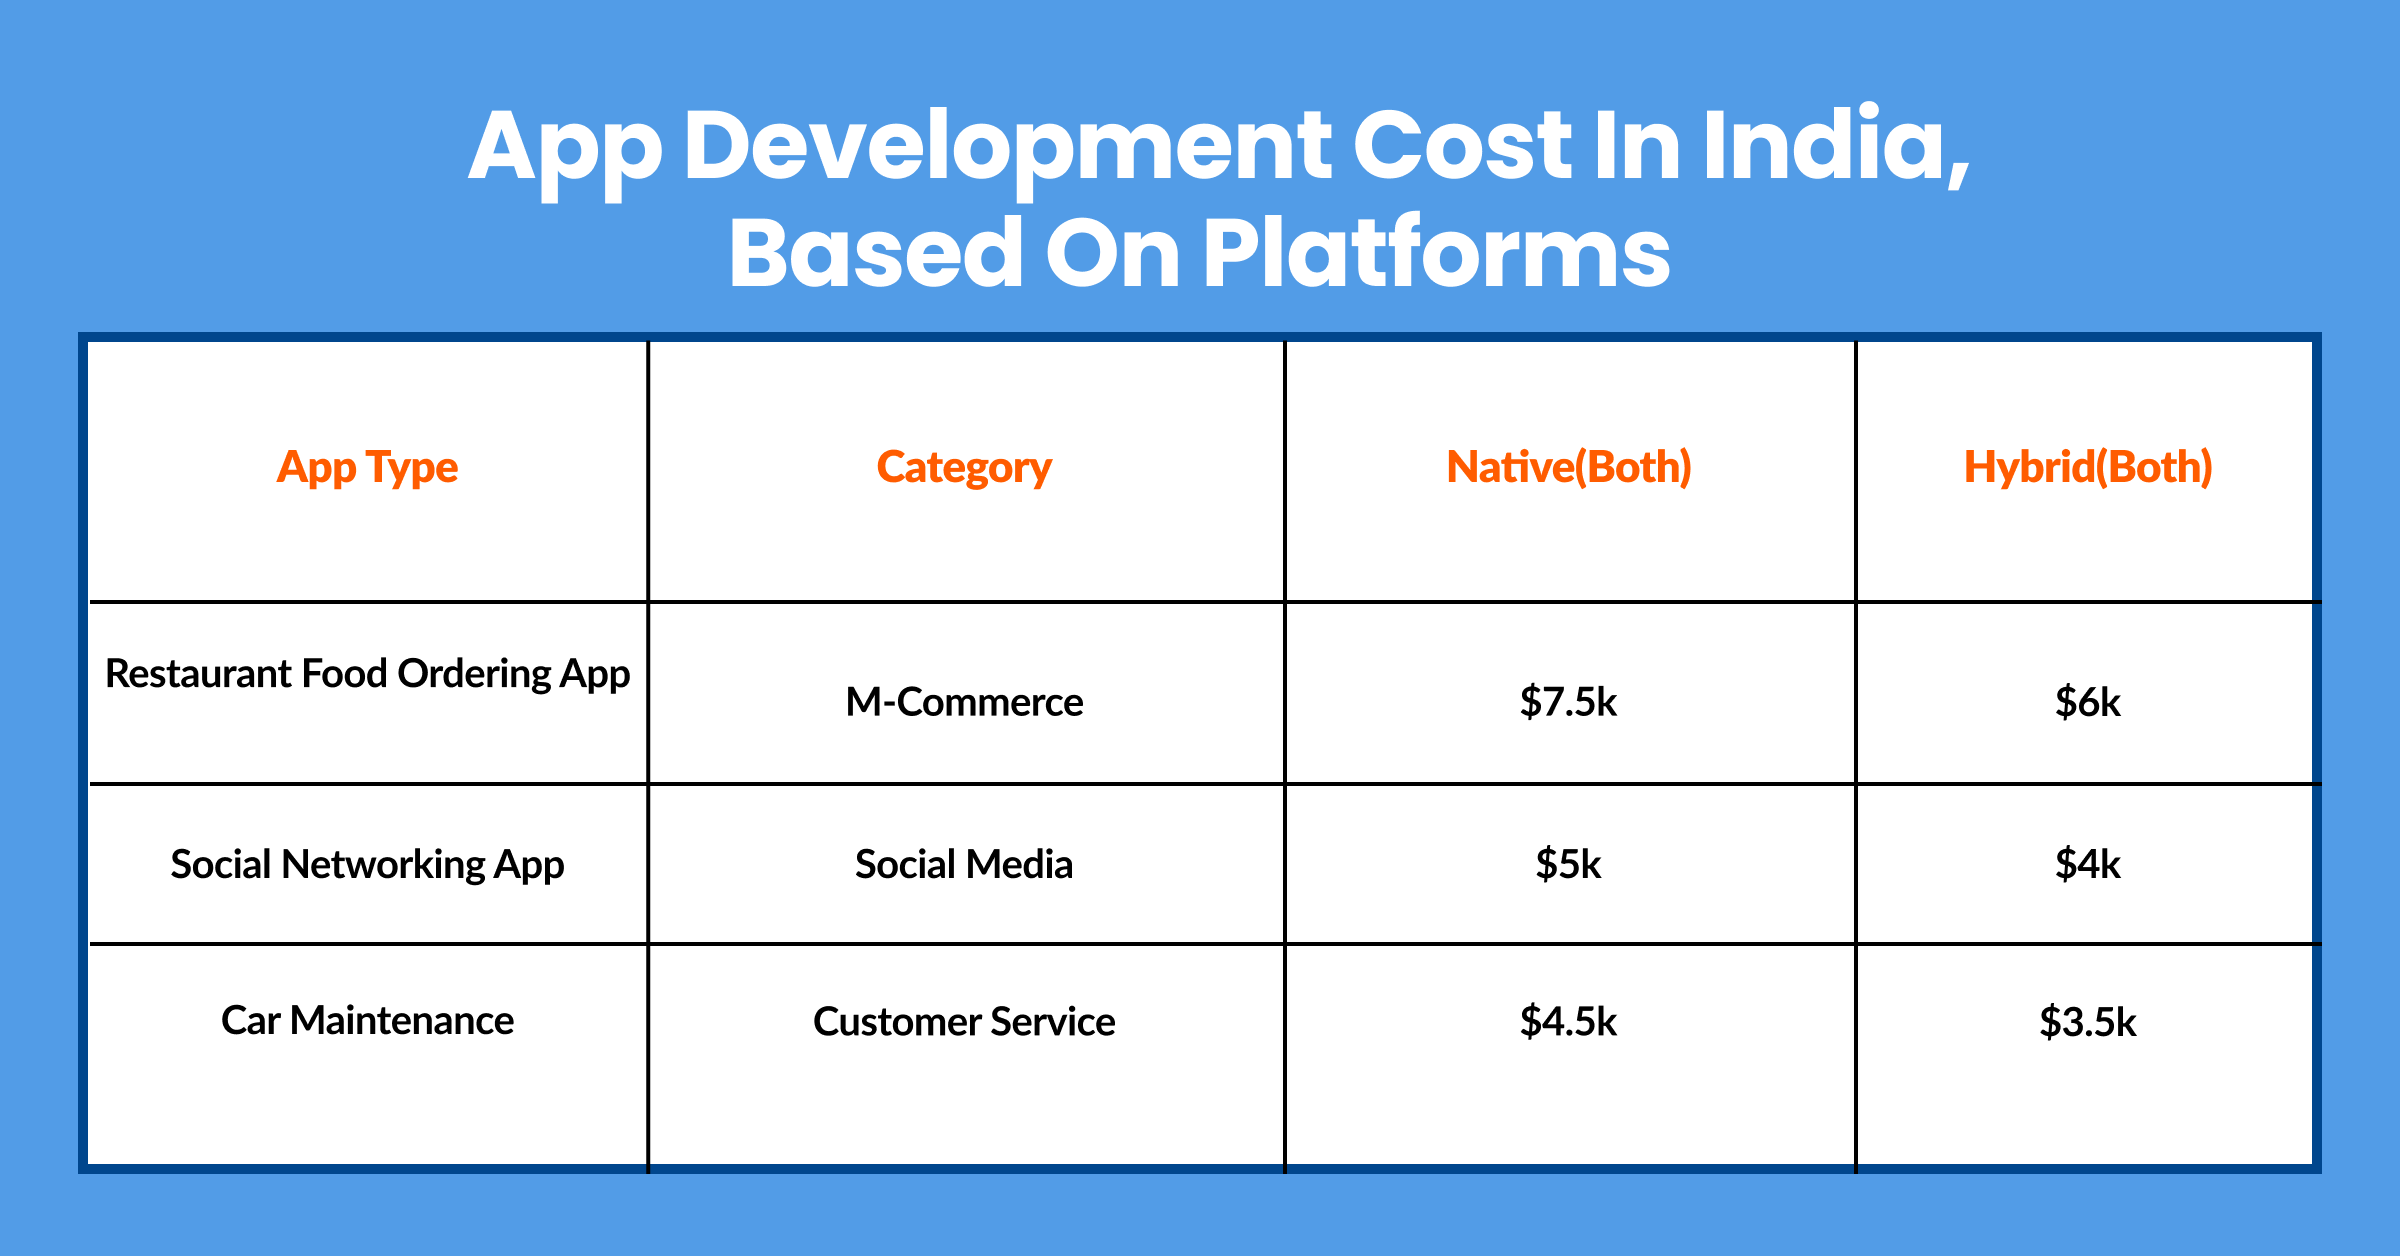 App Development cost in India based on Platforms